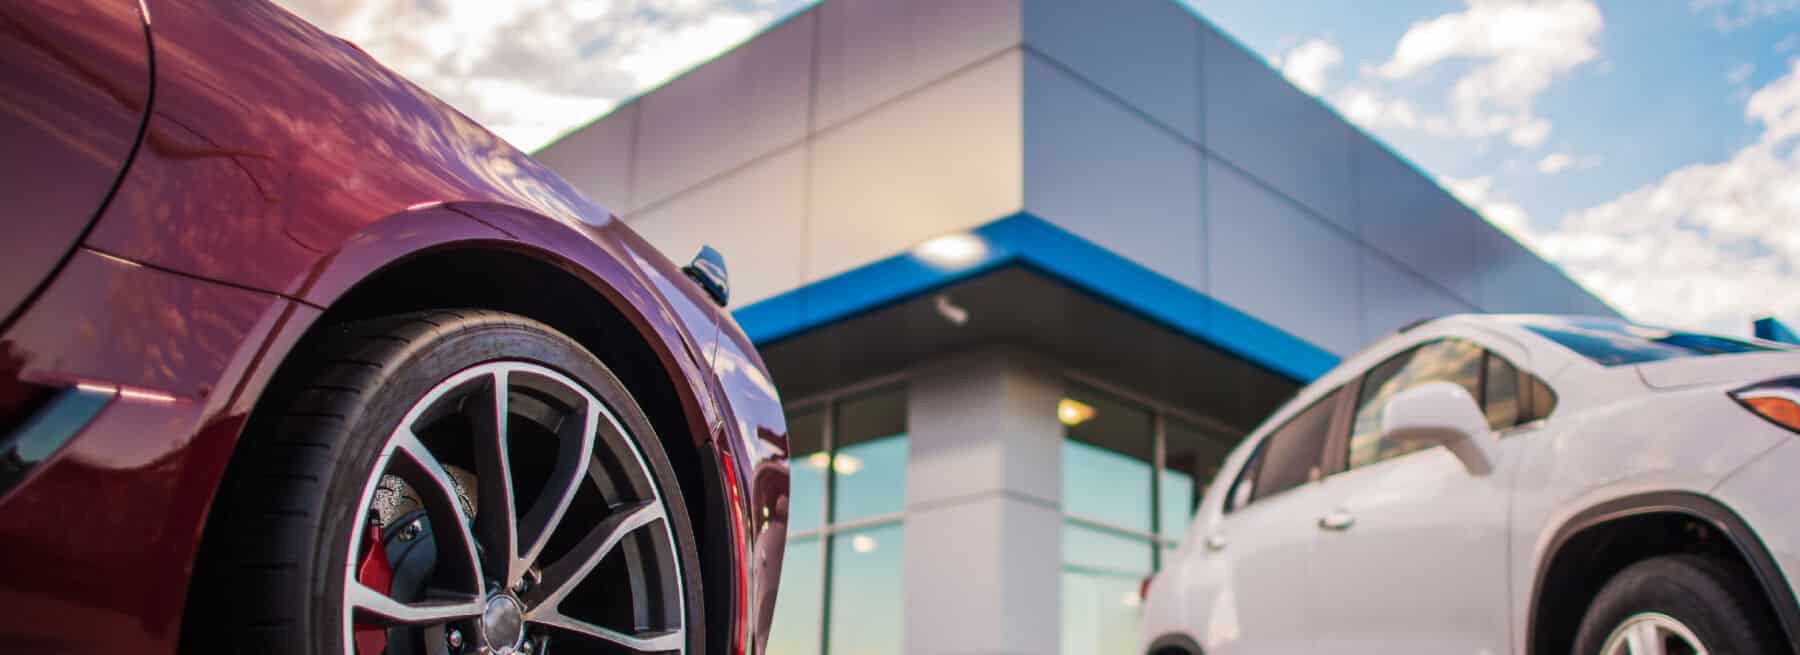 issues plaguing dealerships